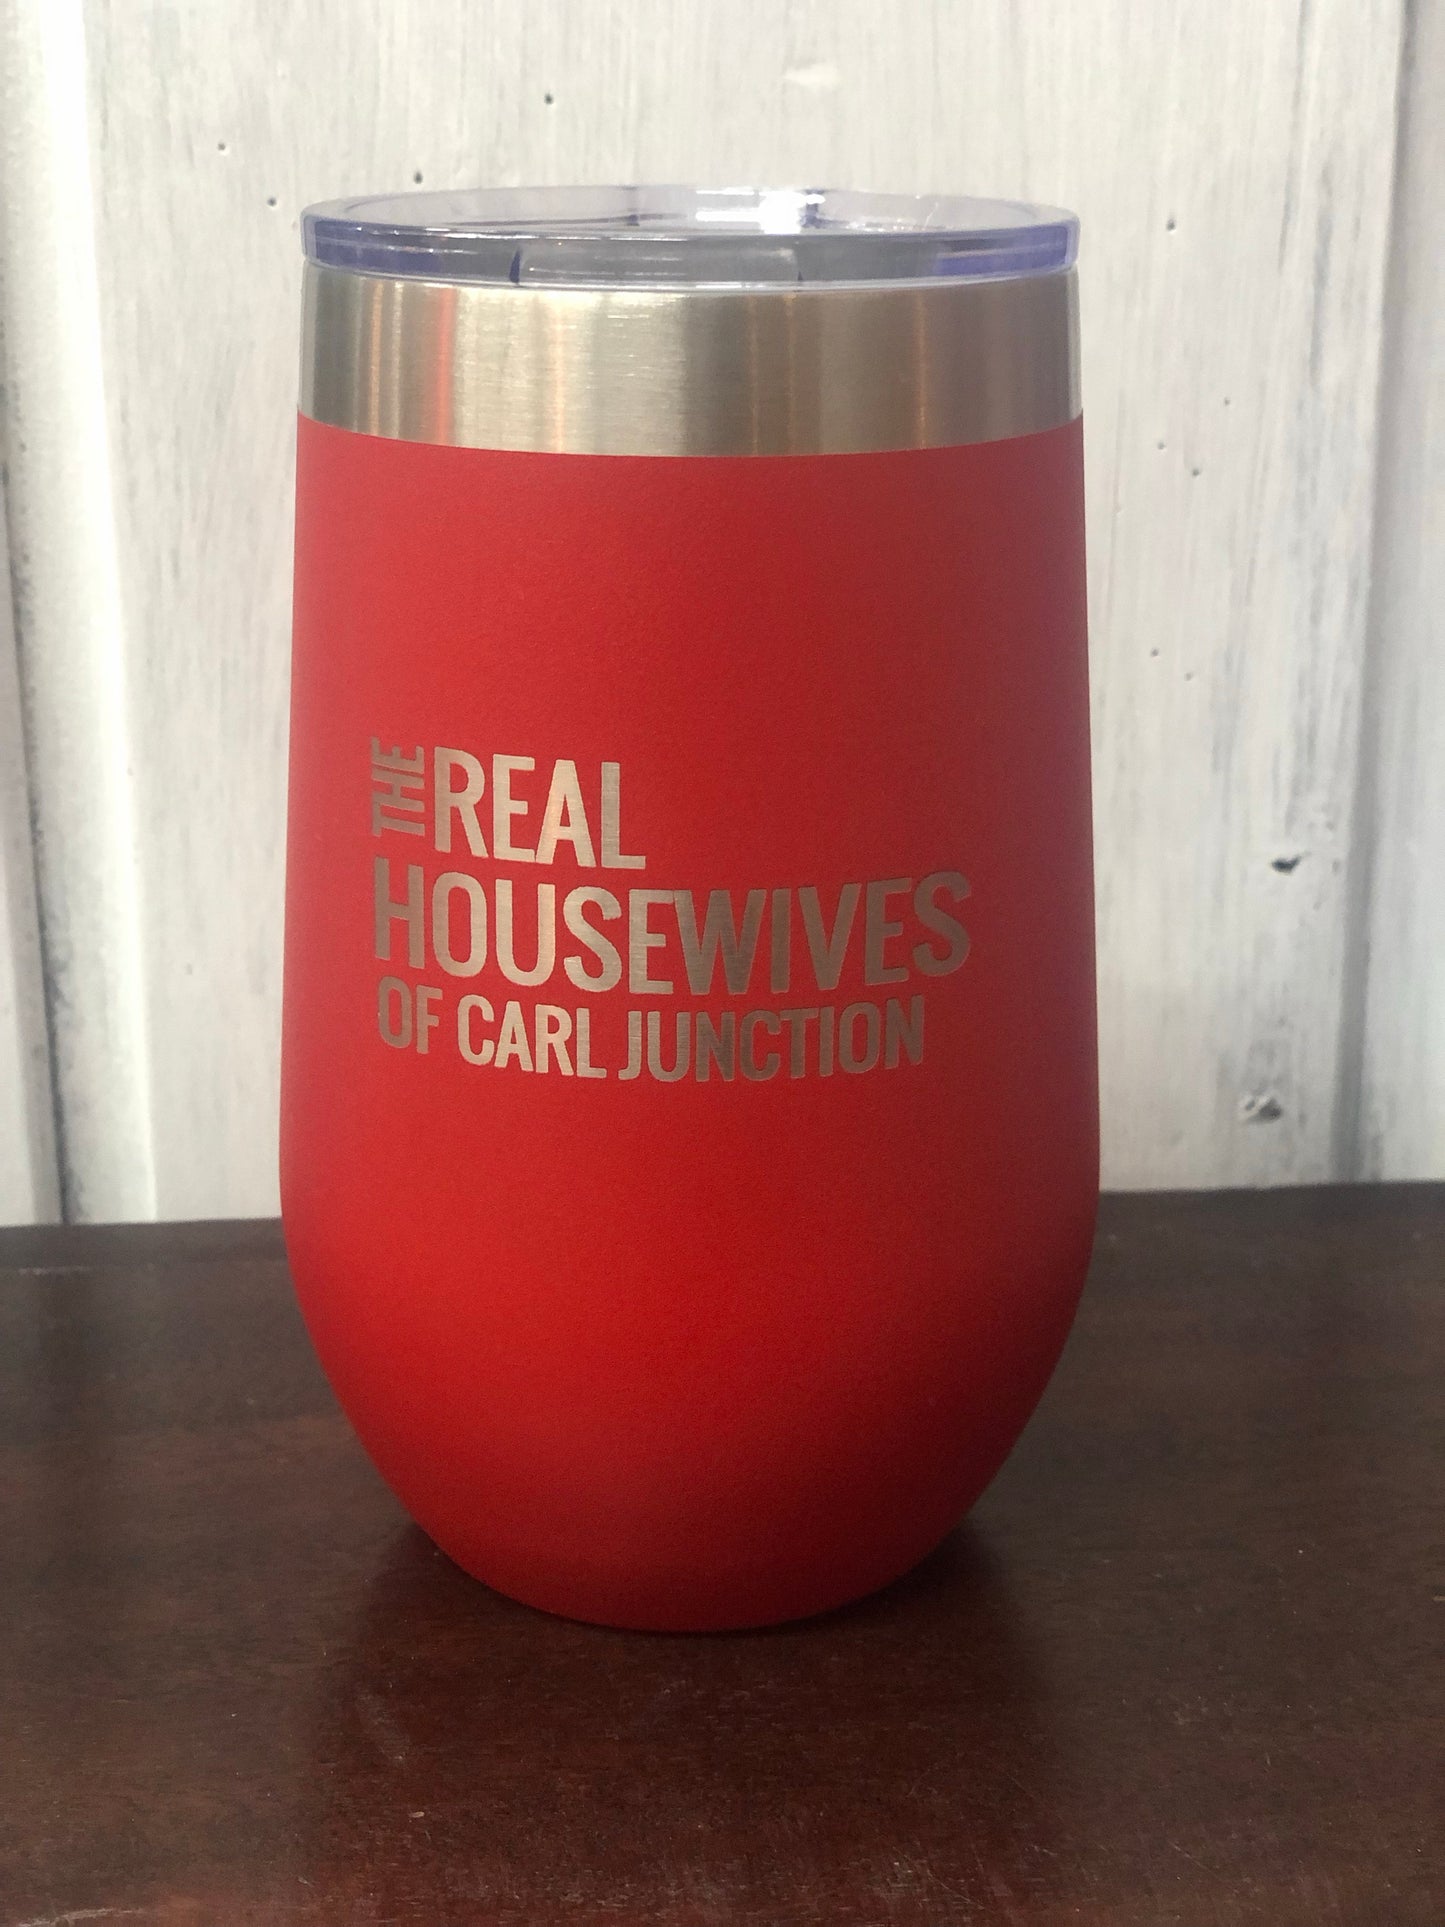 The Real Housewives of Carl Junction 16 oz. Wine Tumbler - Red